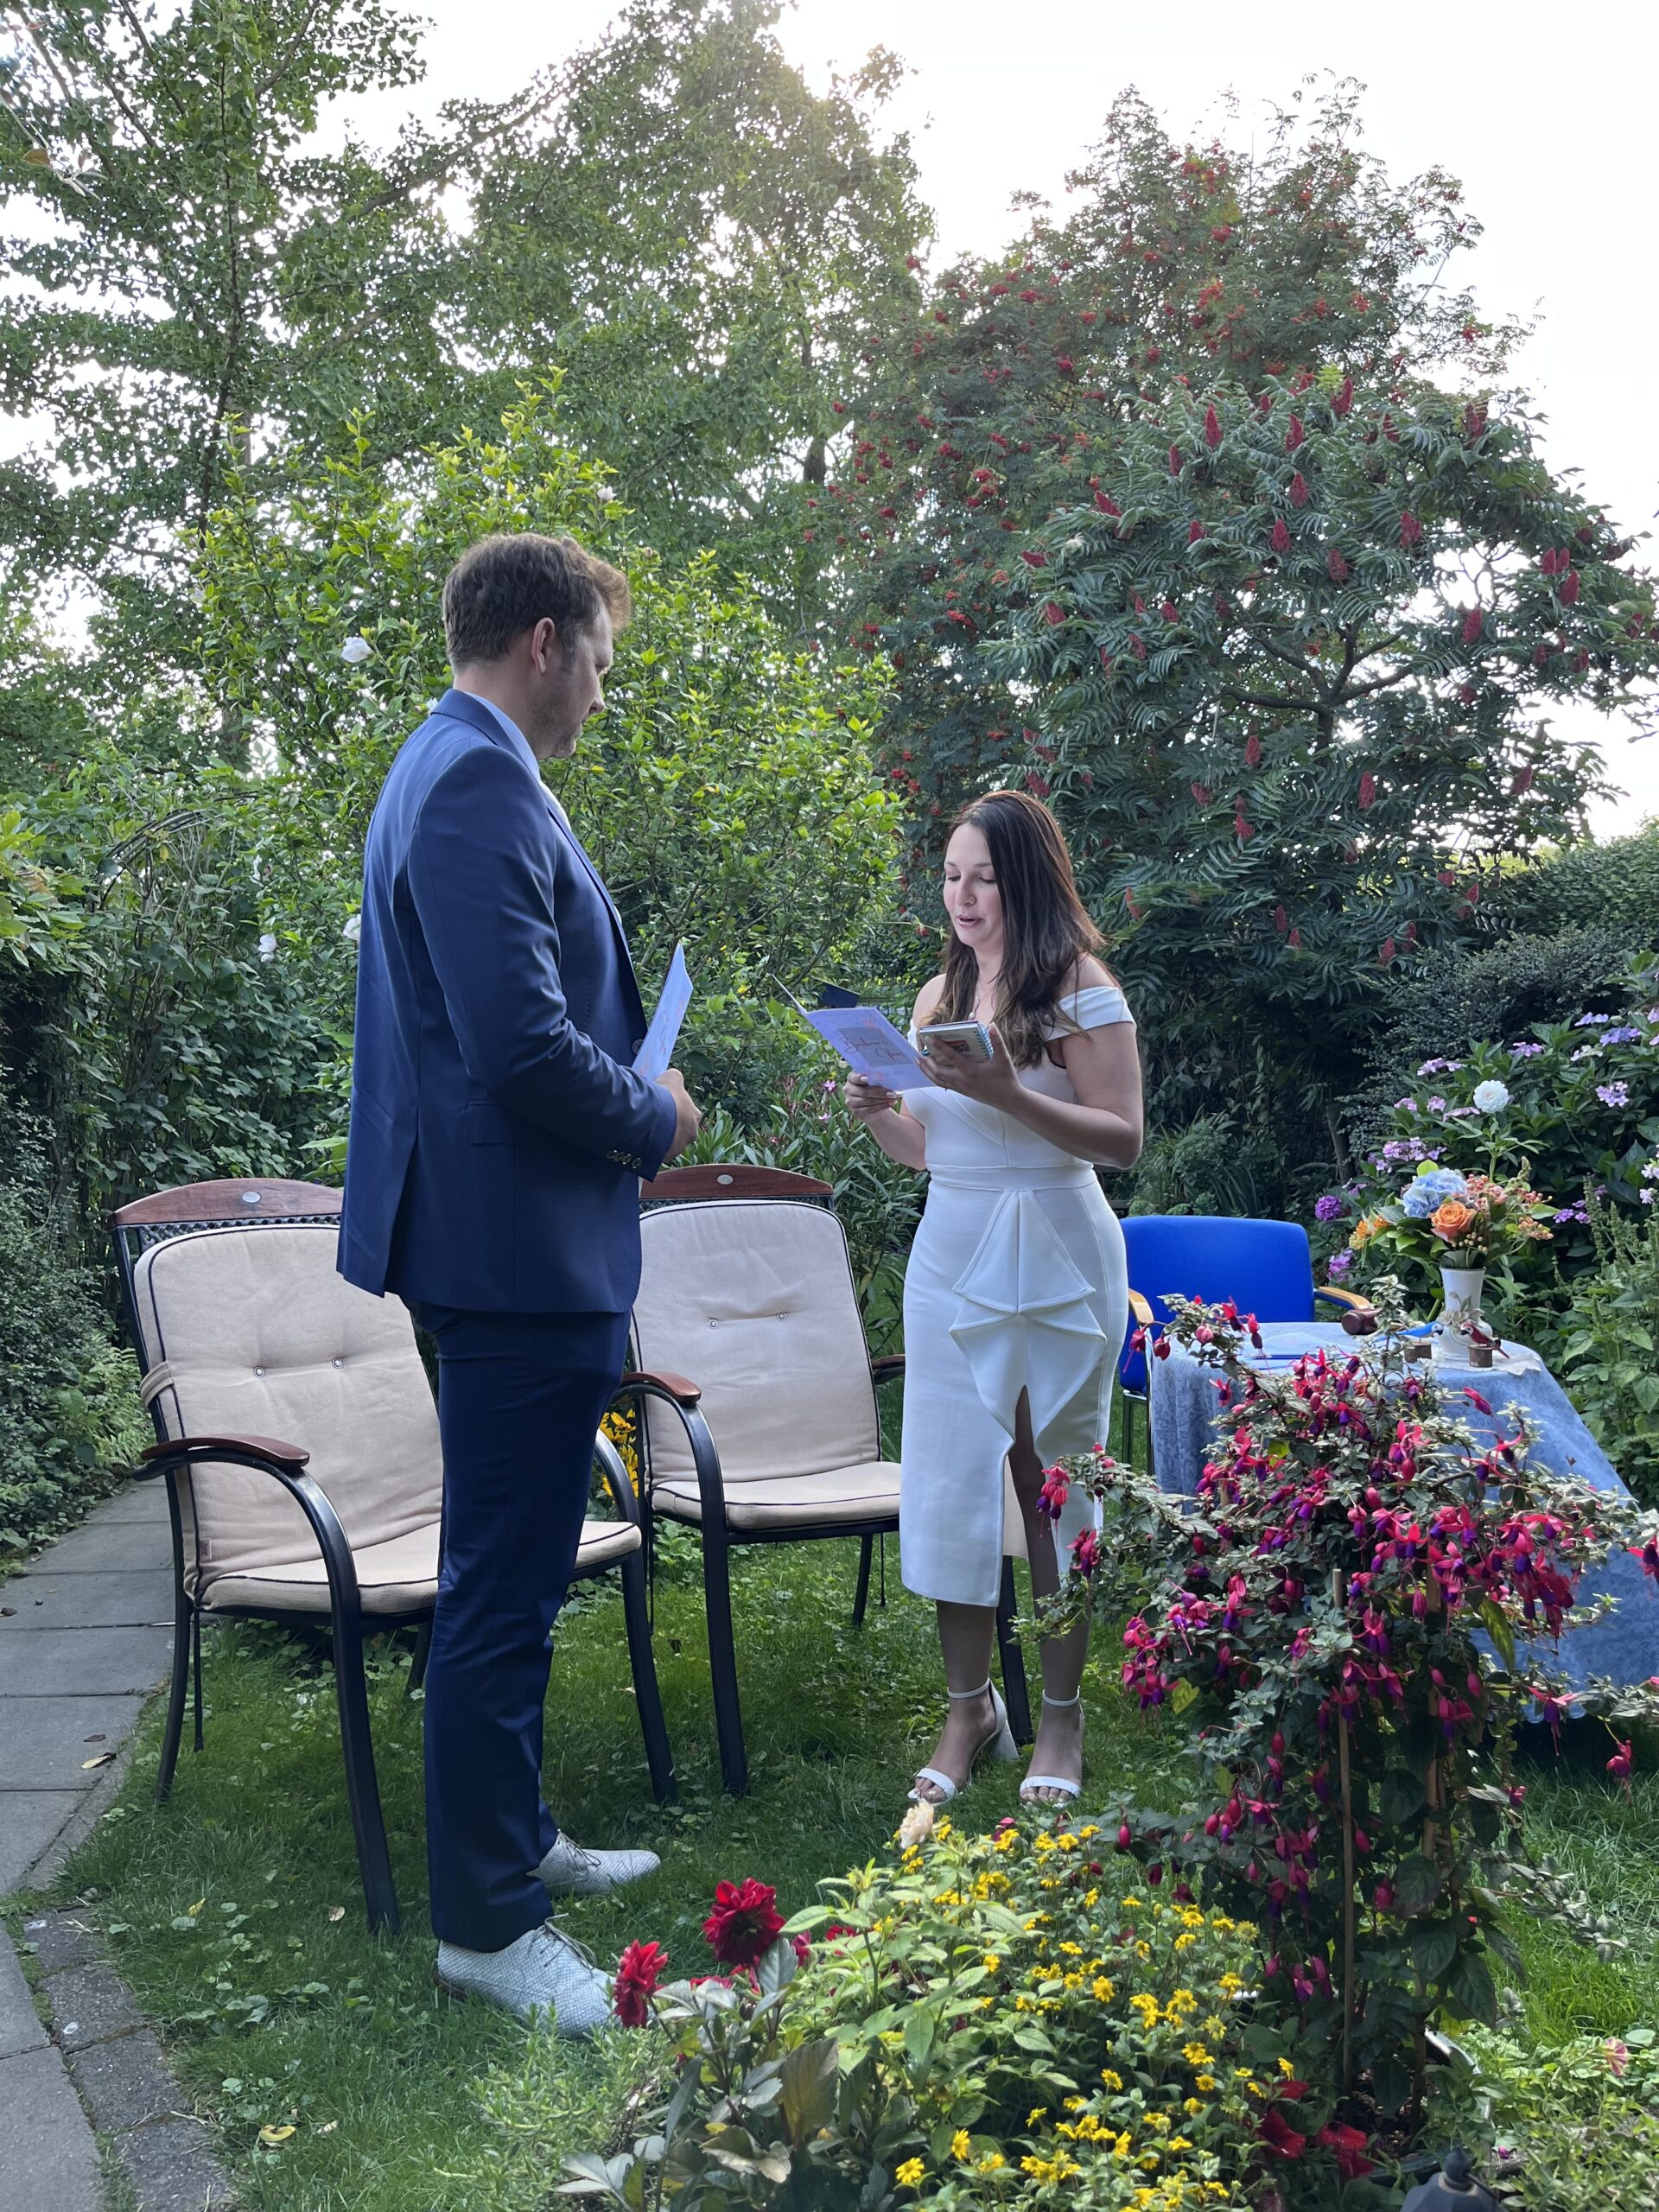 Groom and bride standing in the garden. Both of them faced each other. The bride is reading something in the paper.